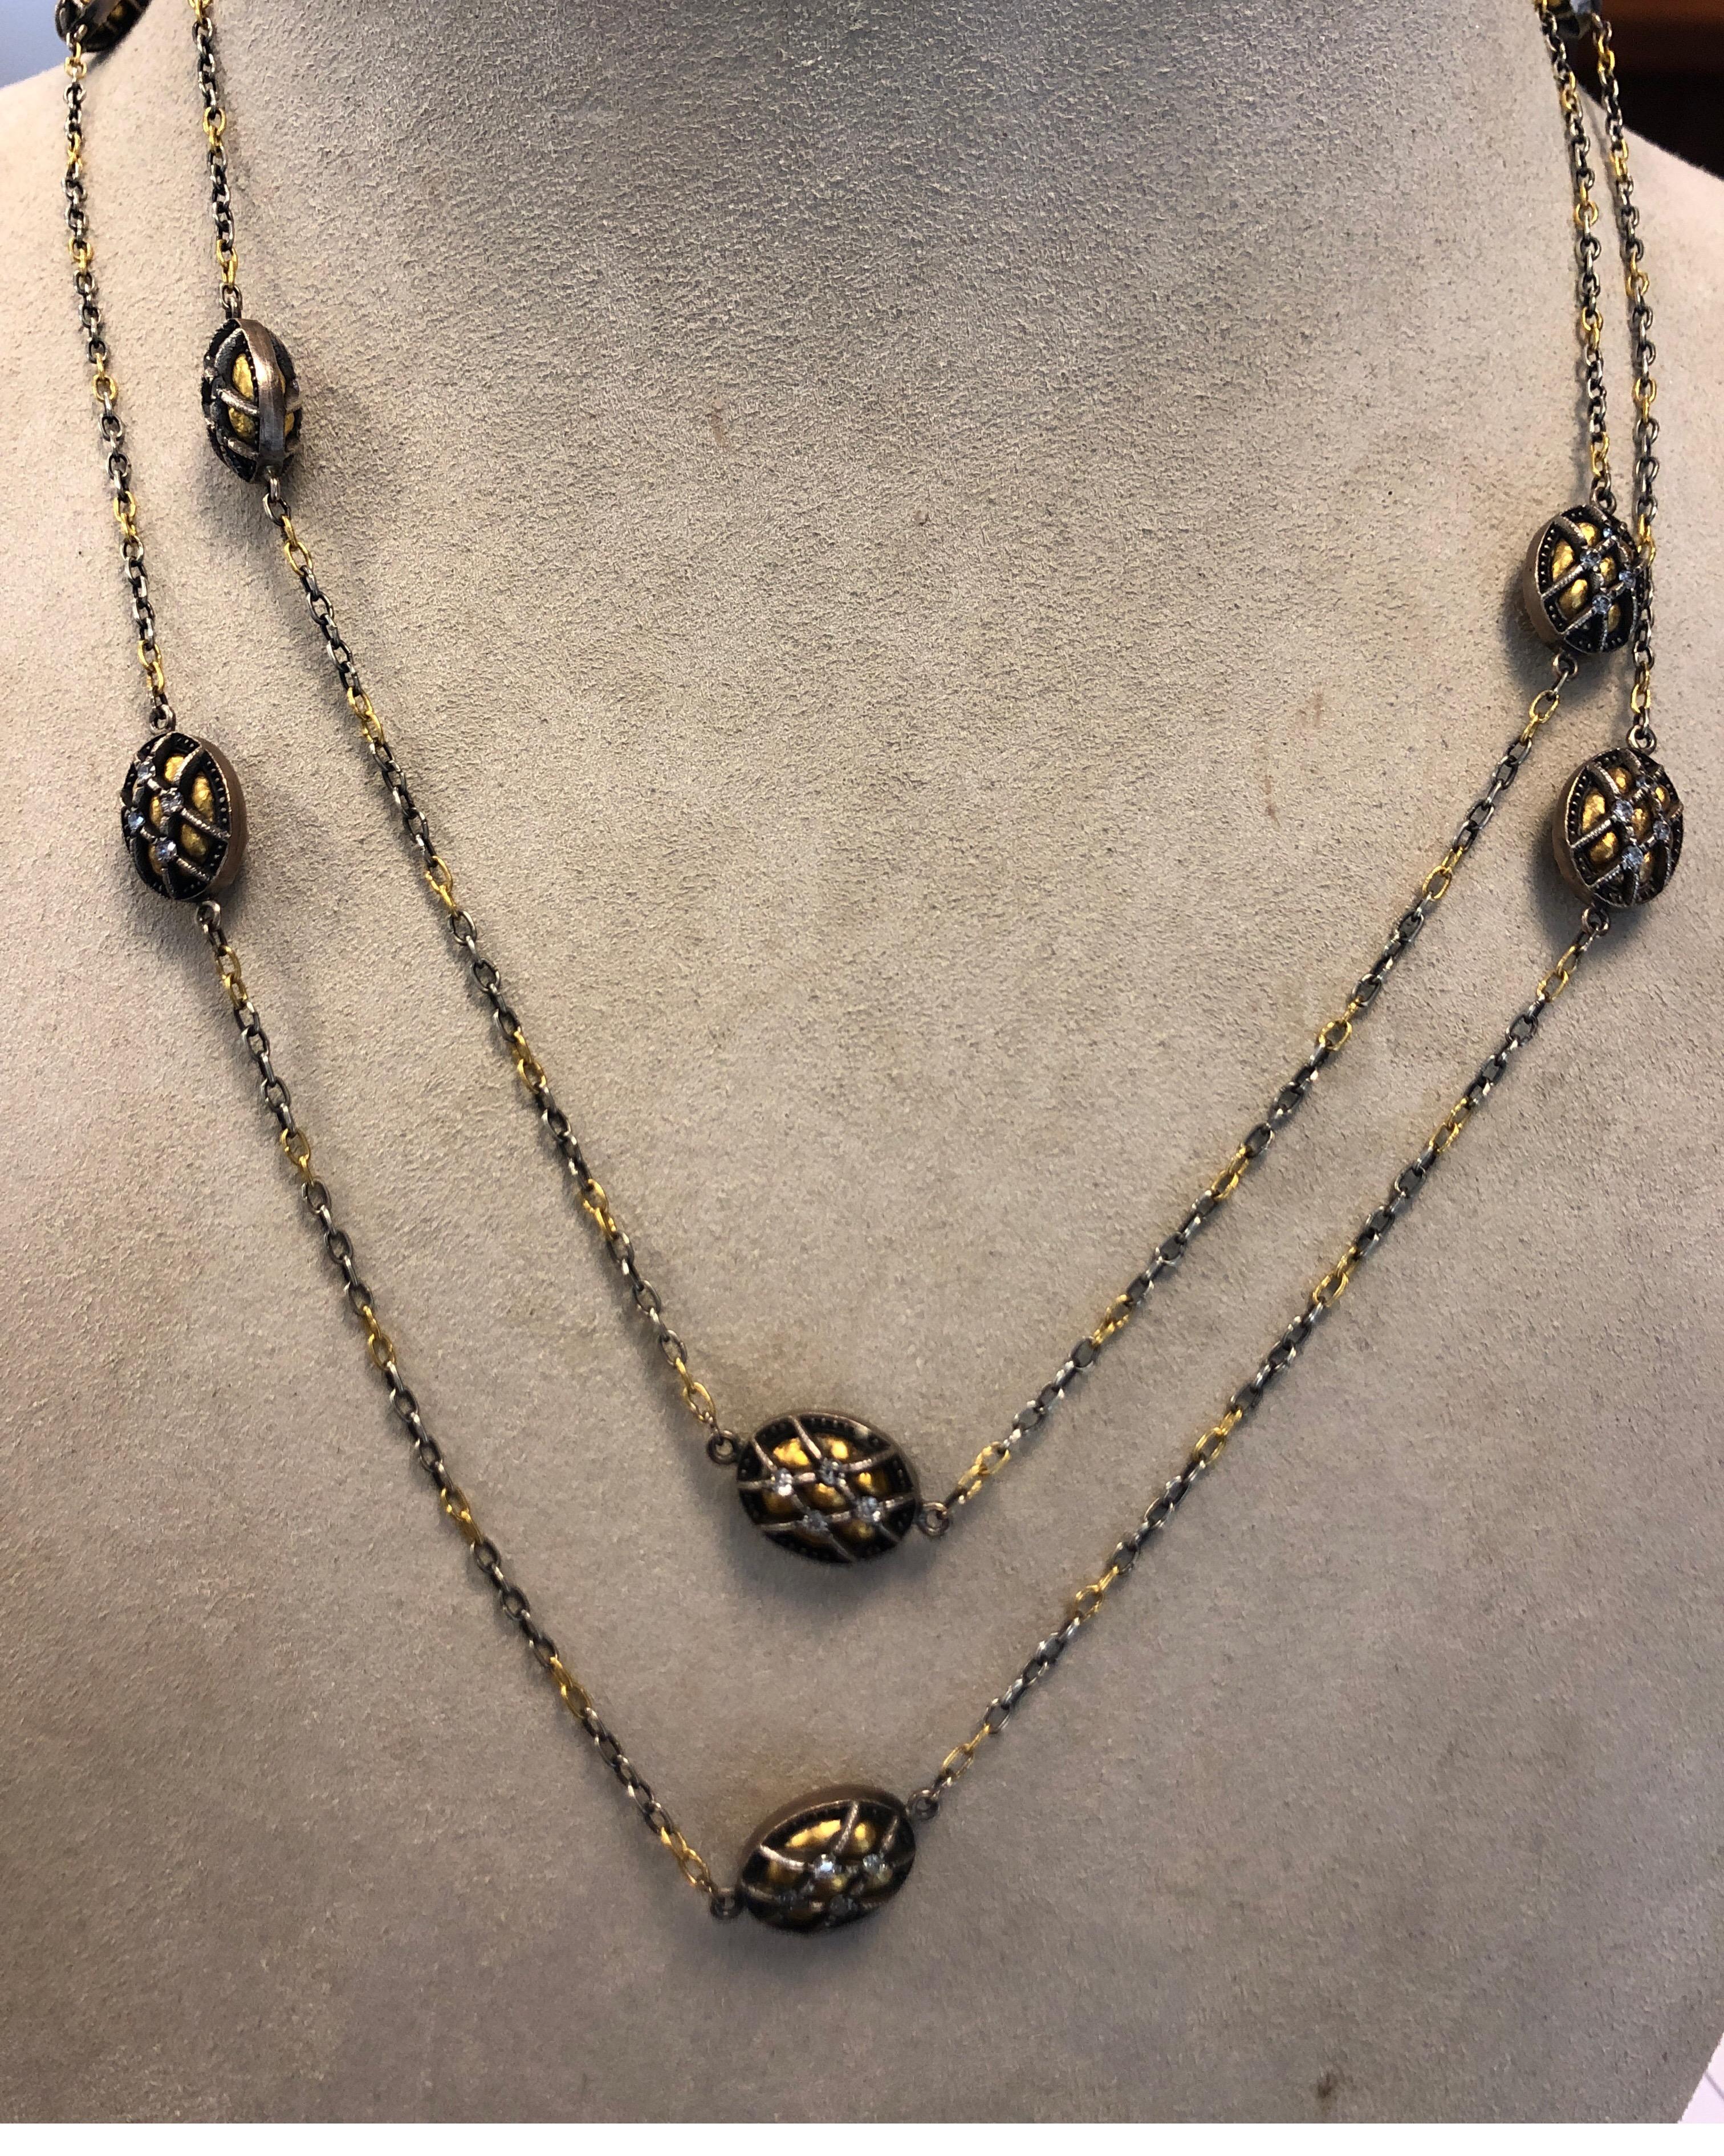 Gurhan 24K yellow gold and silver 42 inch chain necklace, with 11 double sided oval elements each set with 8 round diamonds weighing 1.75cts total. May be worn long or doubled.
Last retail $ 8500










l

